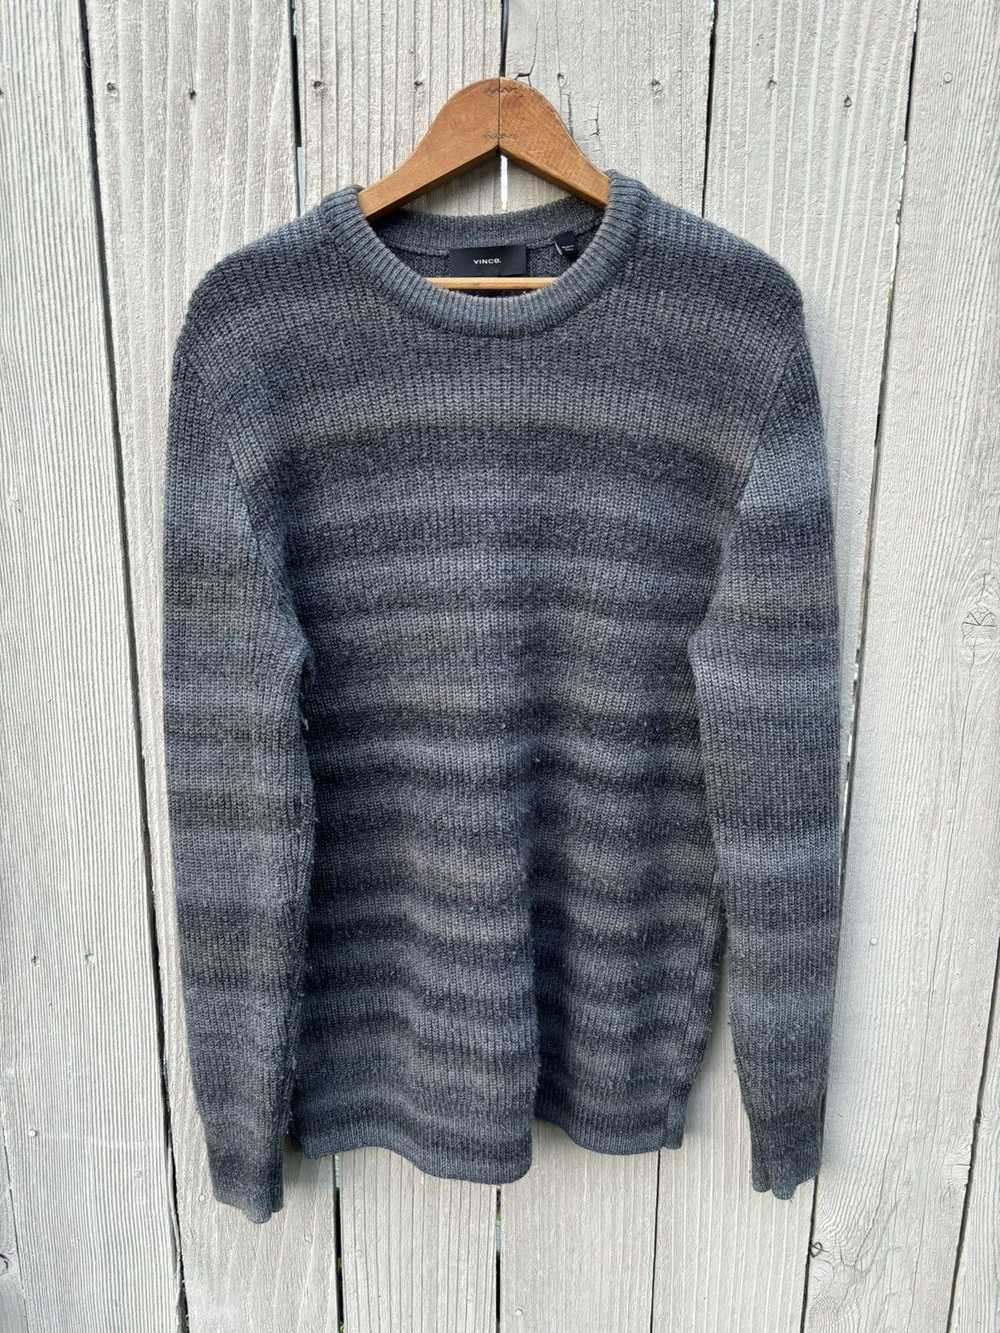 Vince Grey Striped Cashmere Blend Sweater - image 1